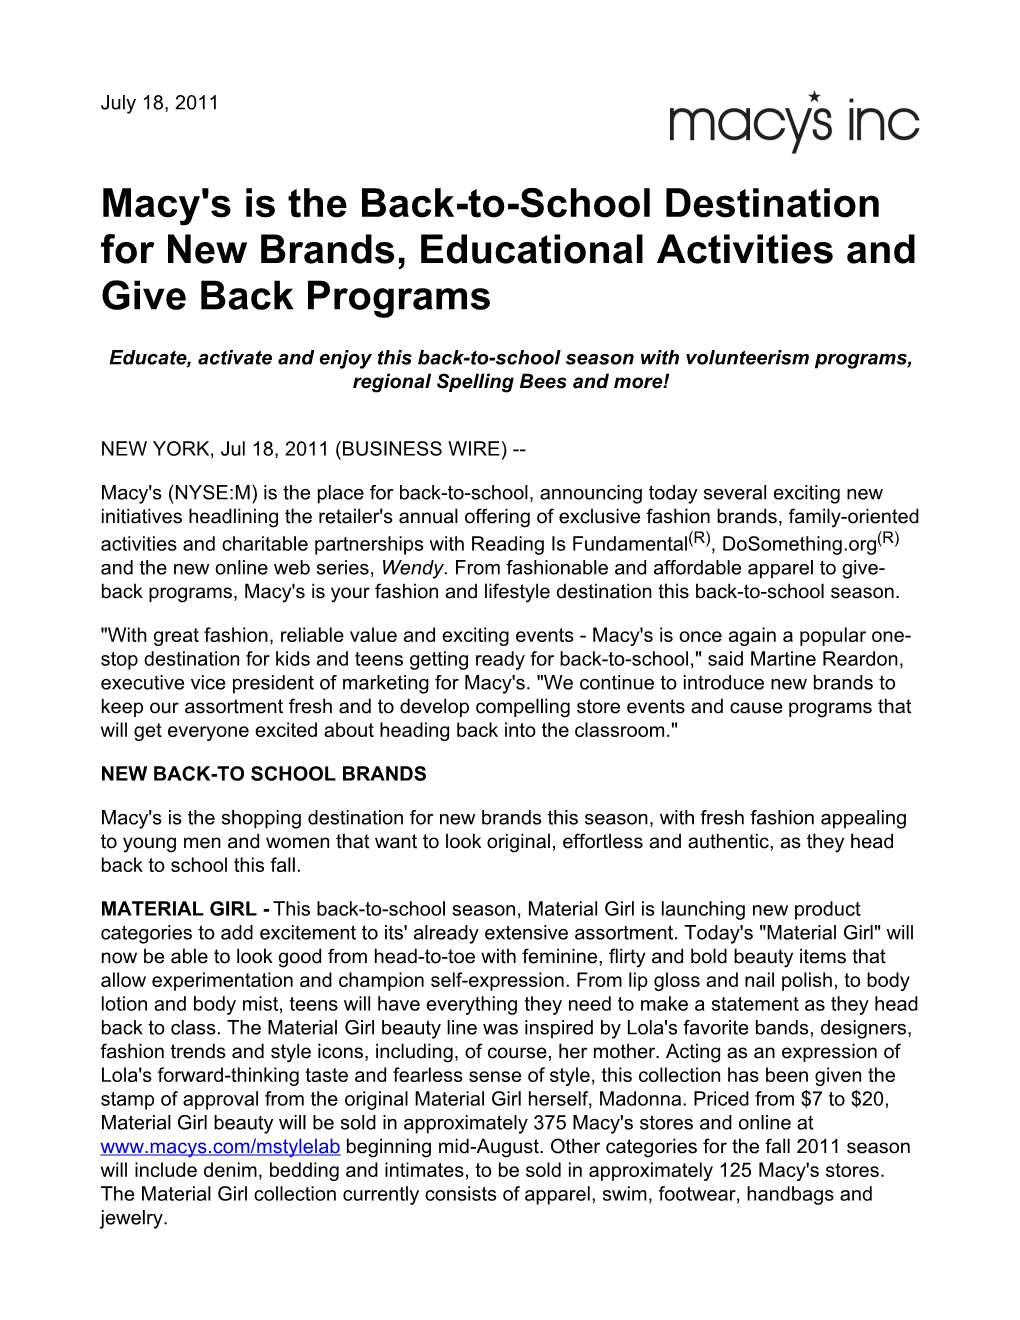 Macy's Is the Back-To-School Destination for New Brands, Educational Activities and Give Back Programs